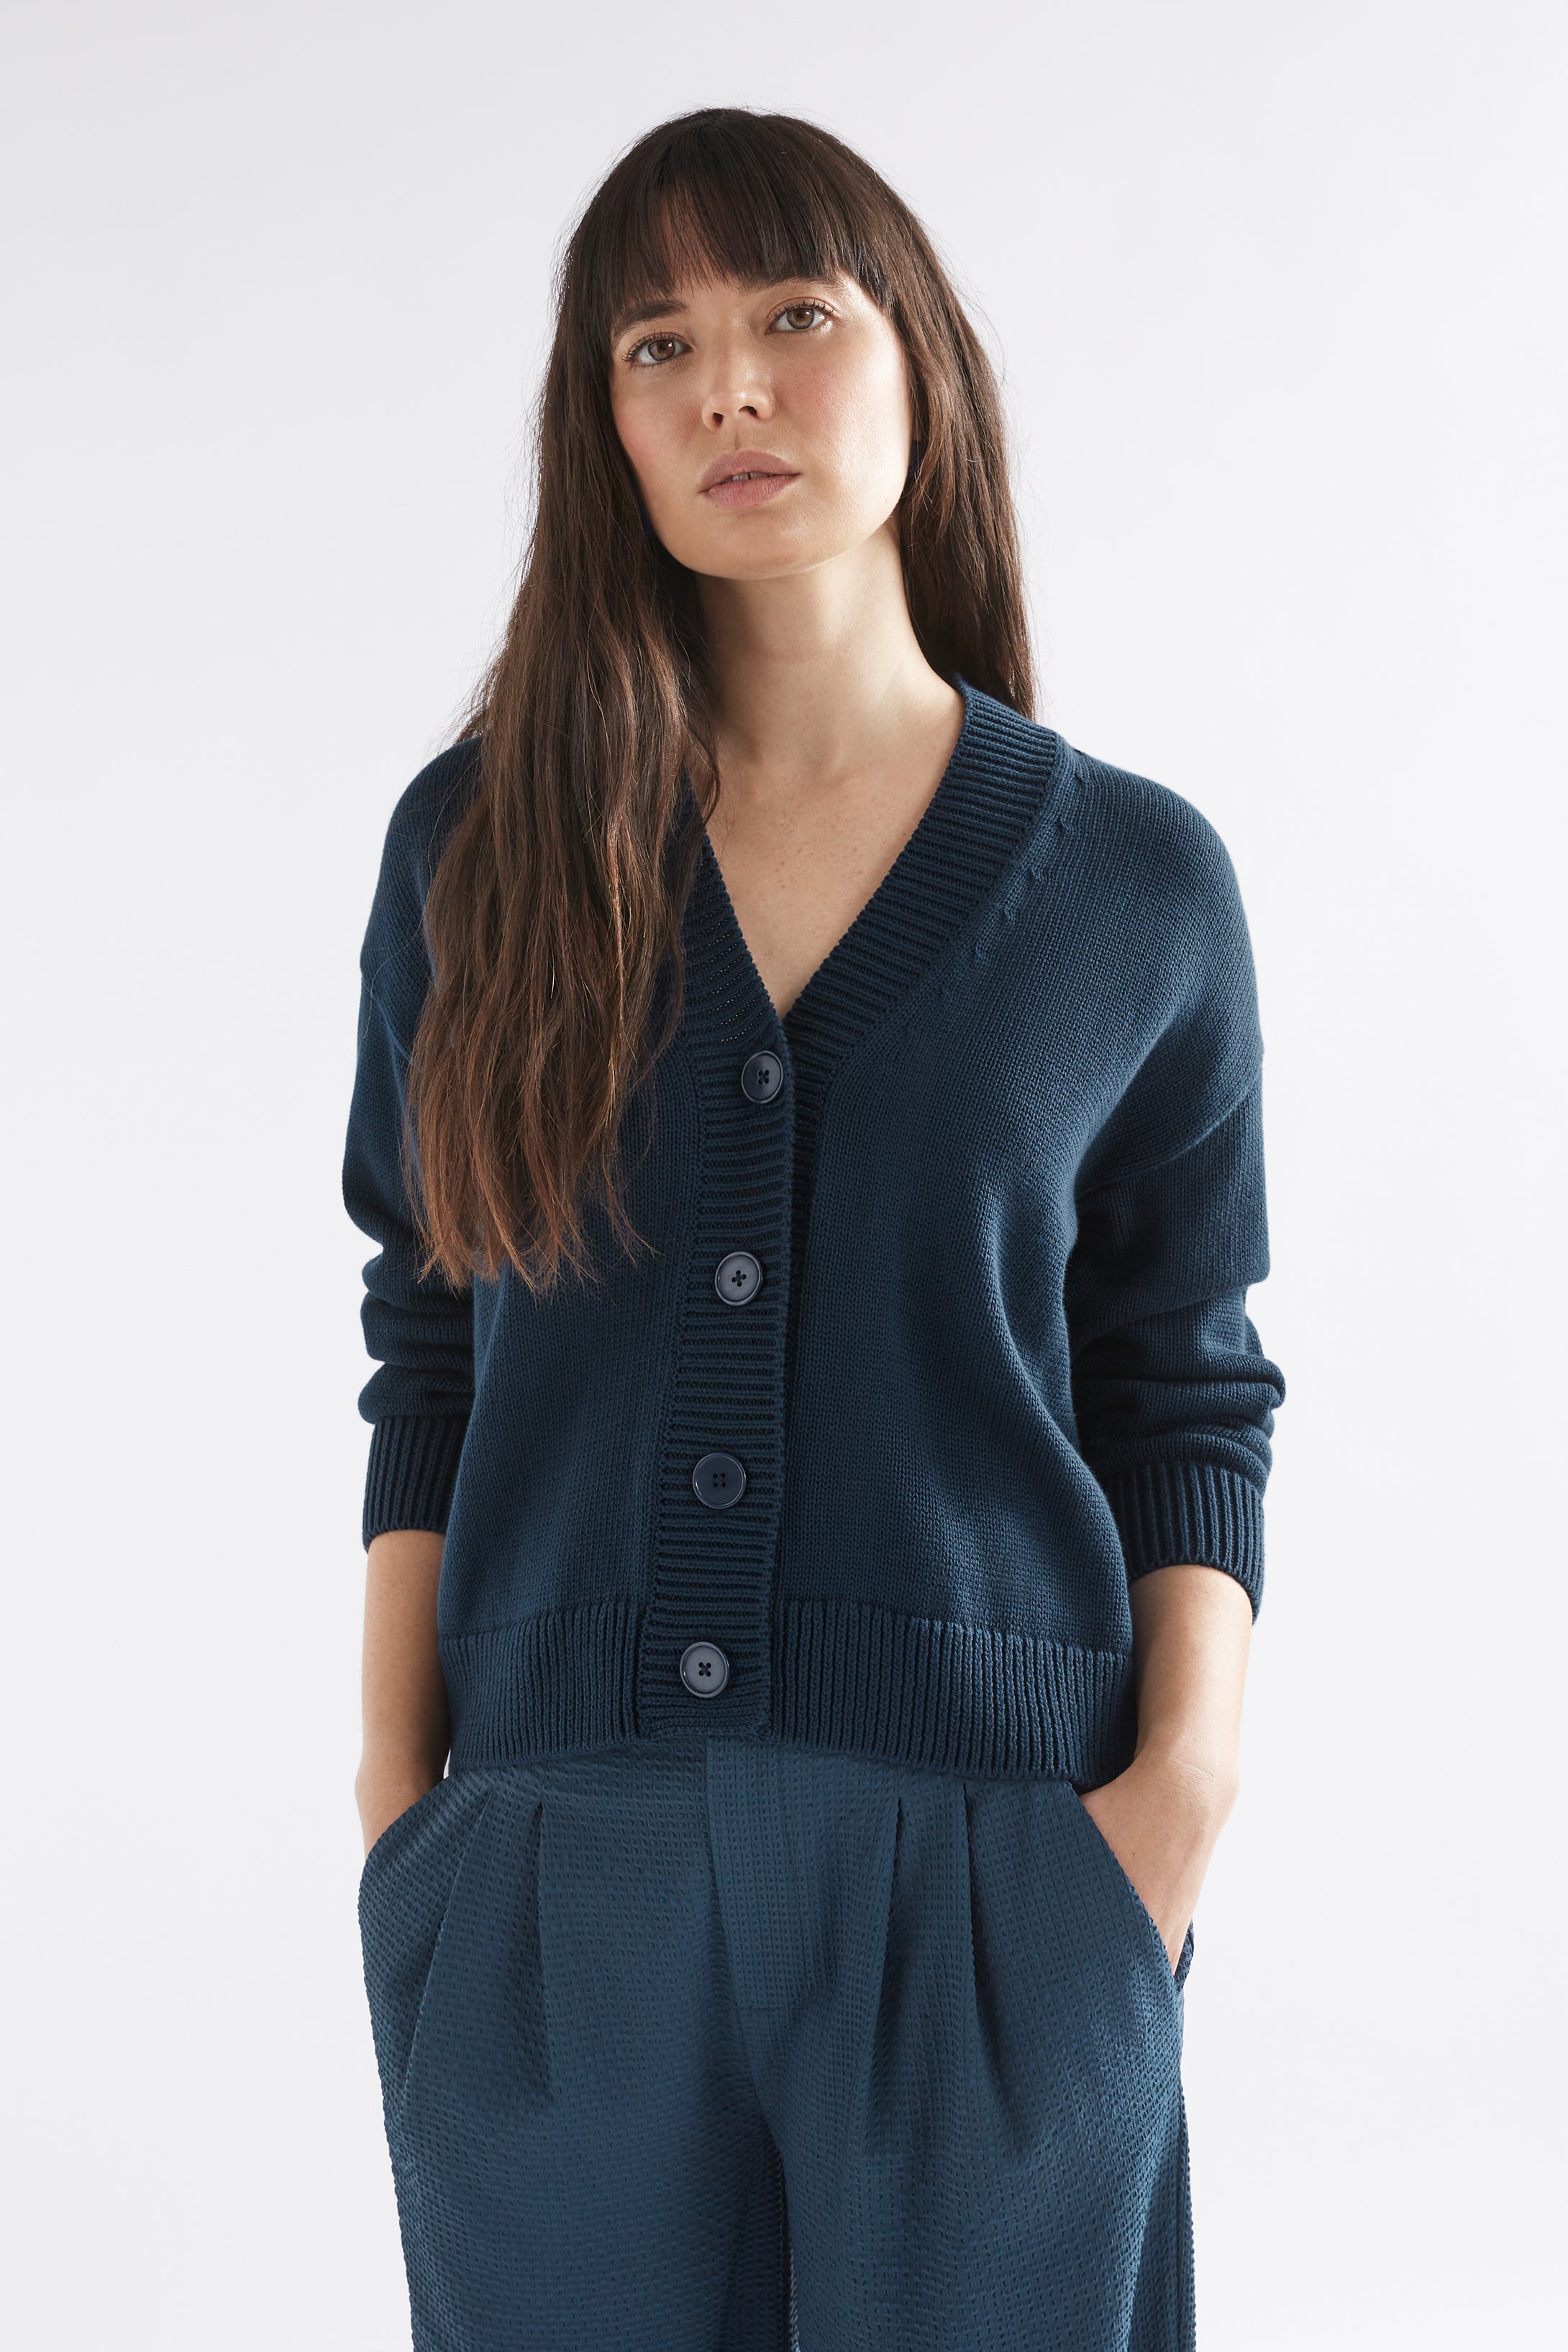 Willow Organic Cotton Everyday Knit Cardigan Model Front | DEEP SEA BLUE